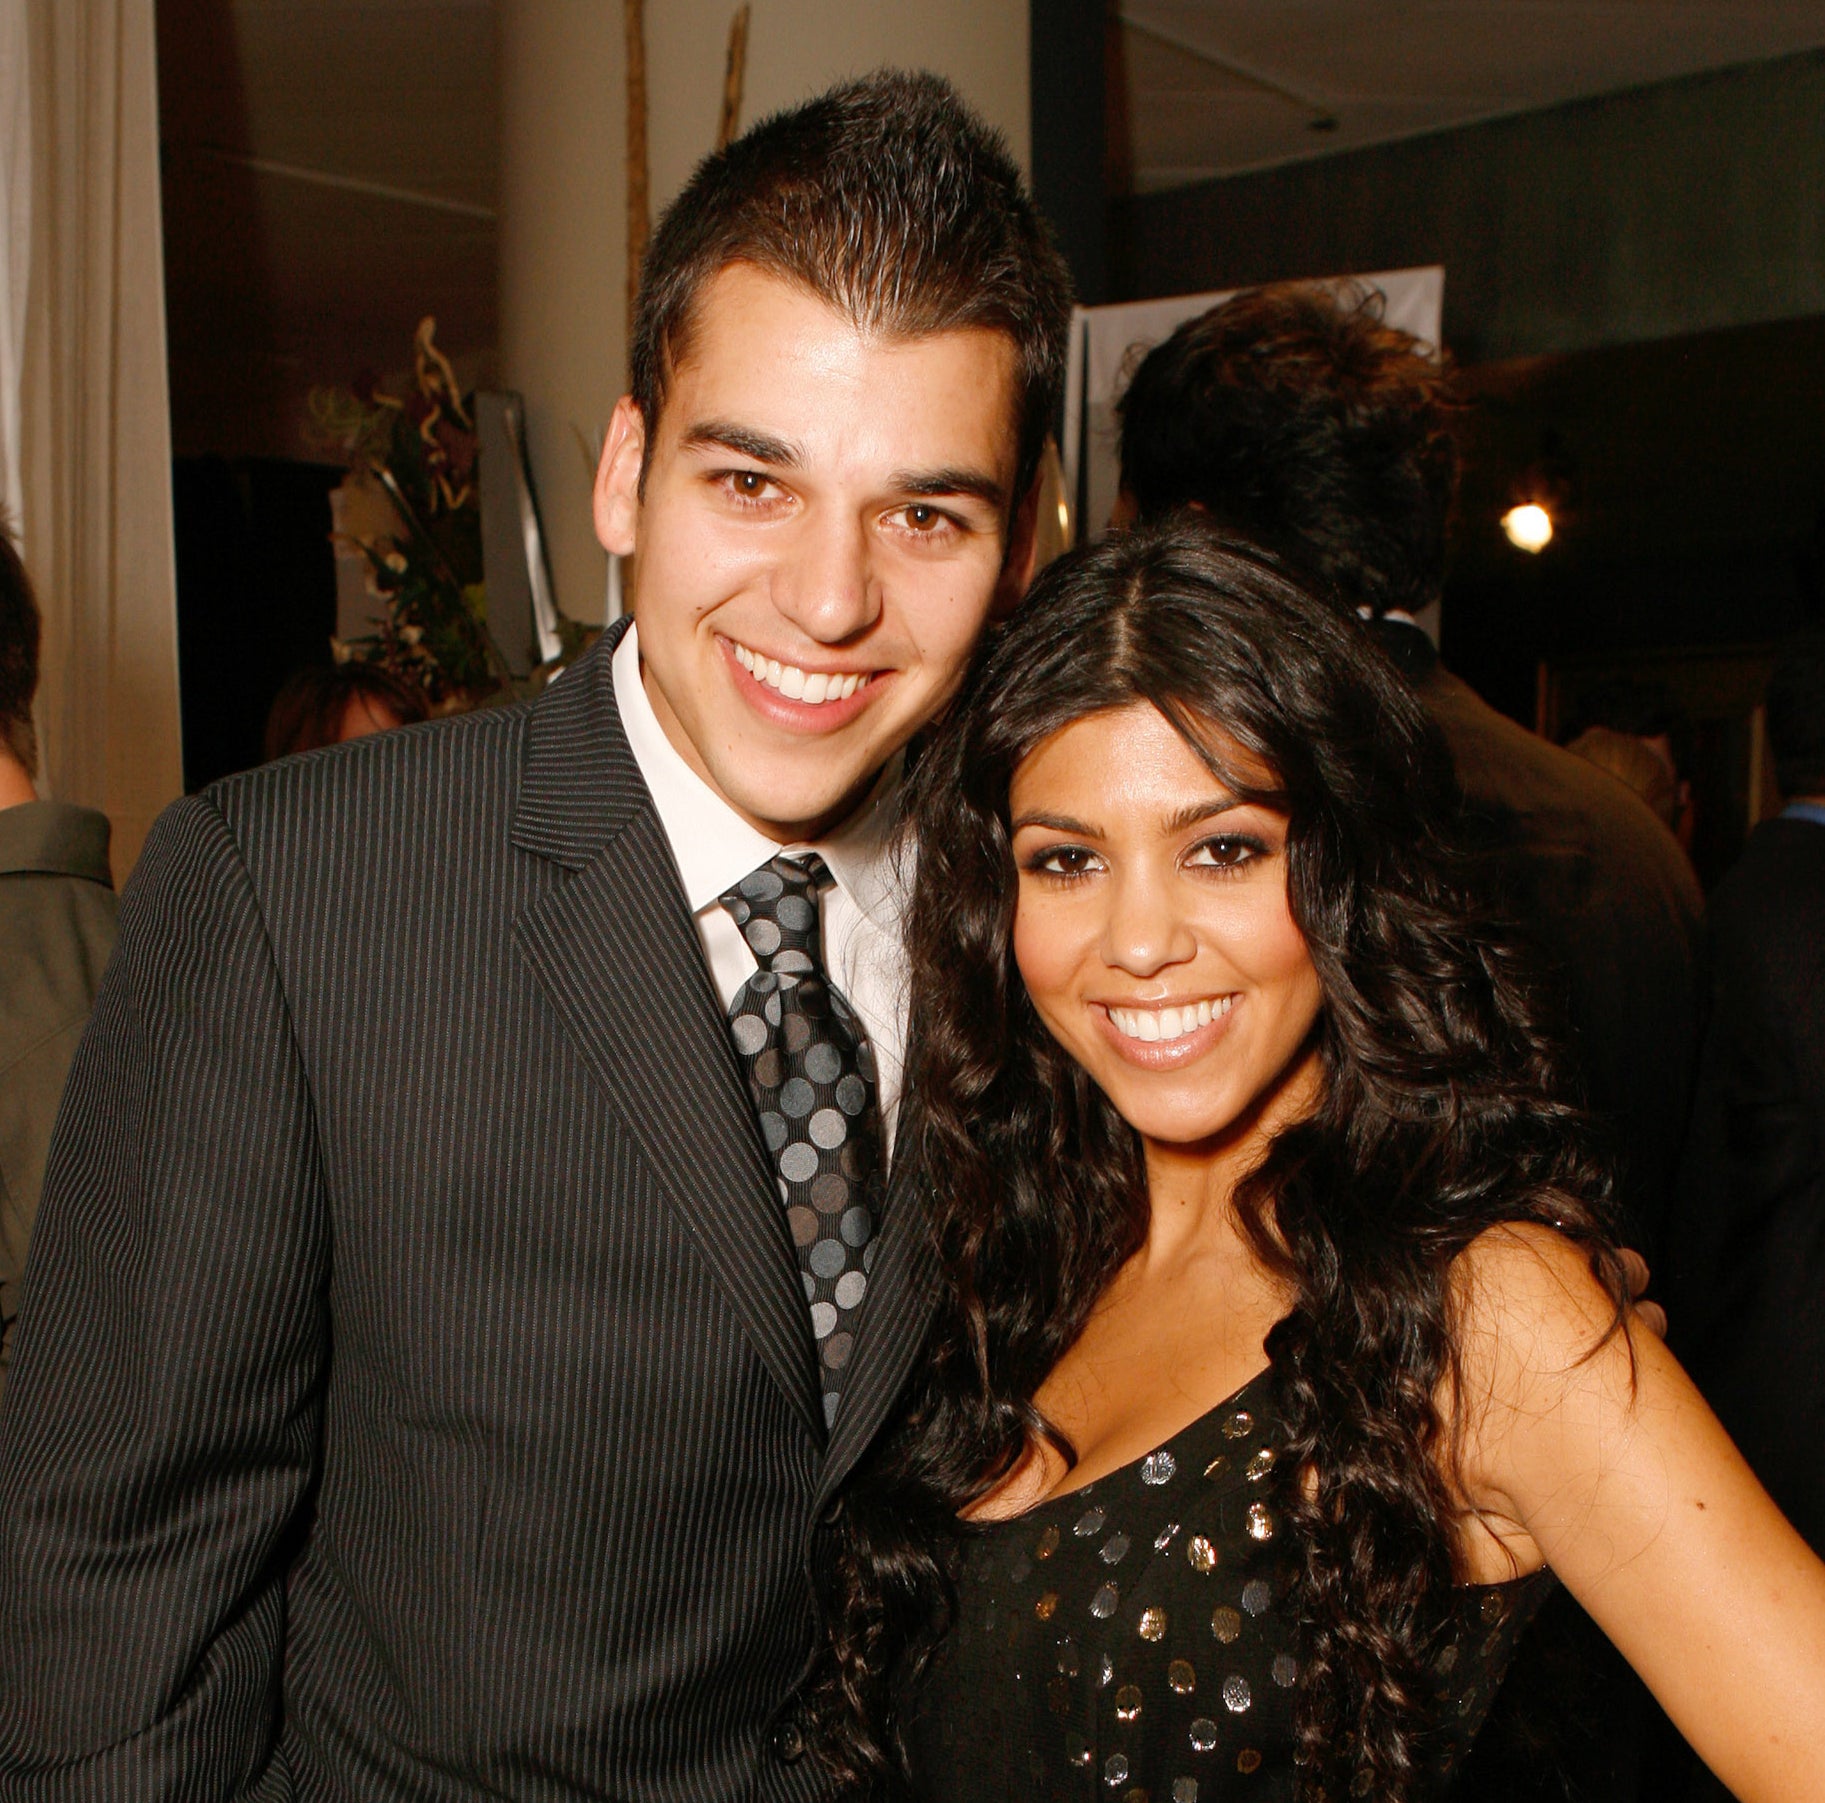 Rob and Kourtney smiling for a photo